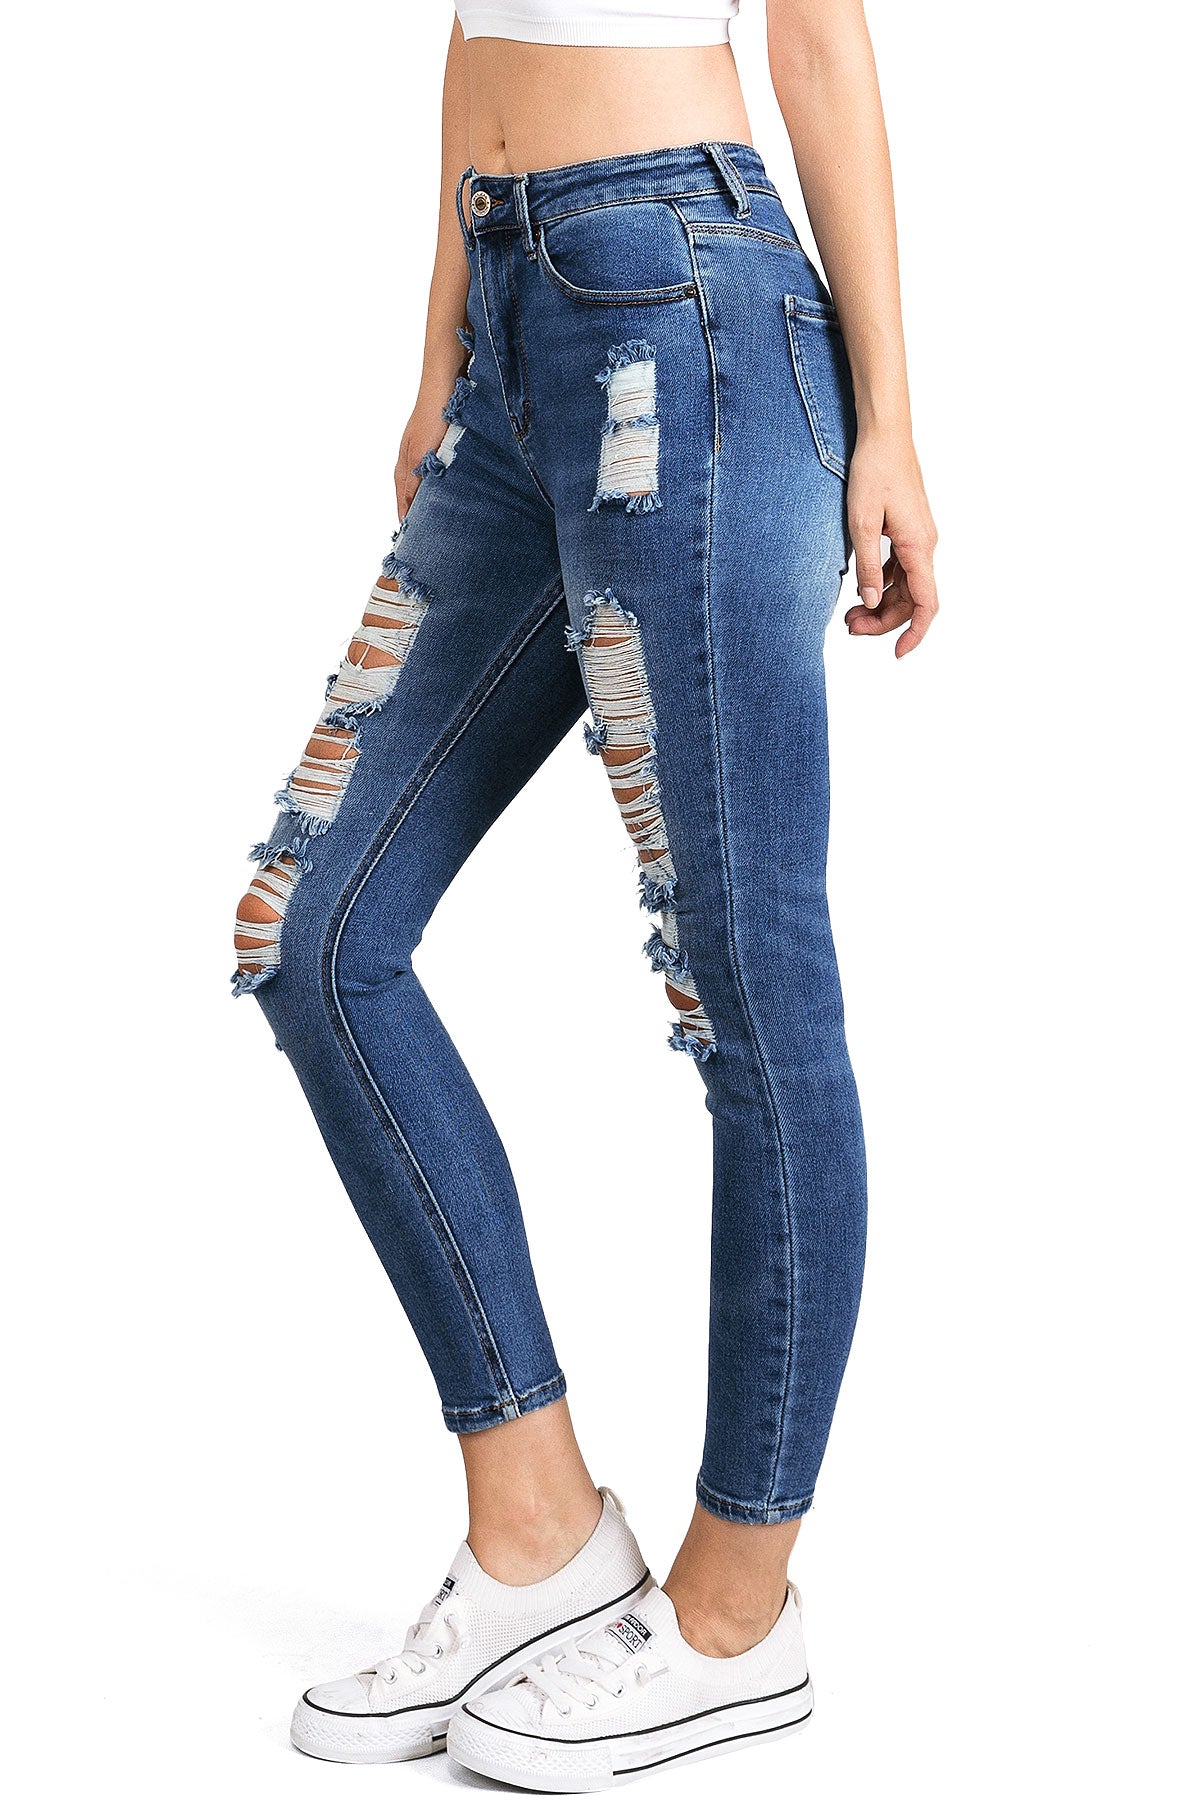 Wax Jean Women's Juniors Distressed High Rise Ankle Skinny Jeans (Dark, 7) - image 3 of 5